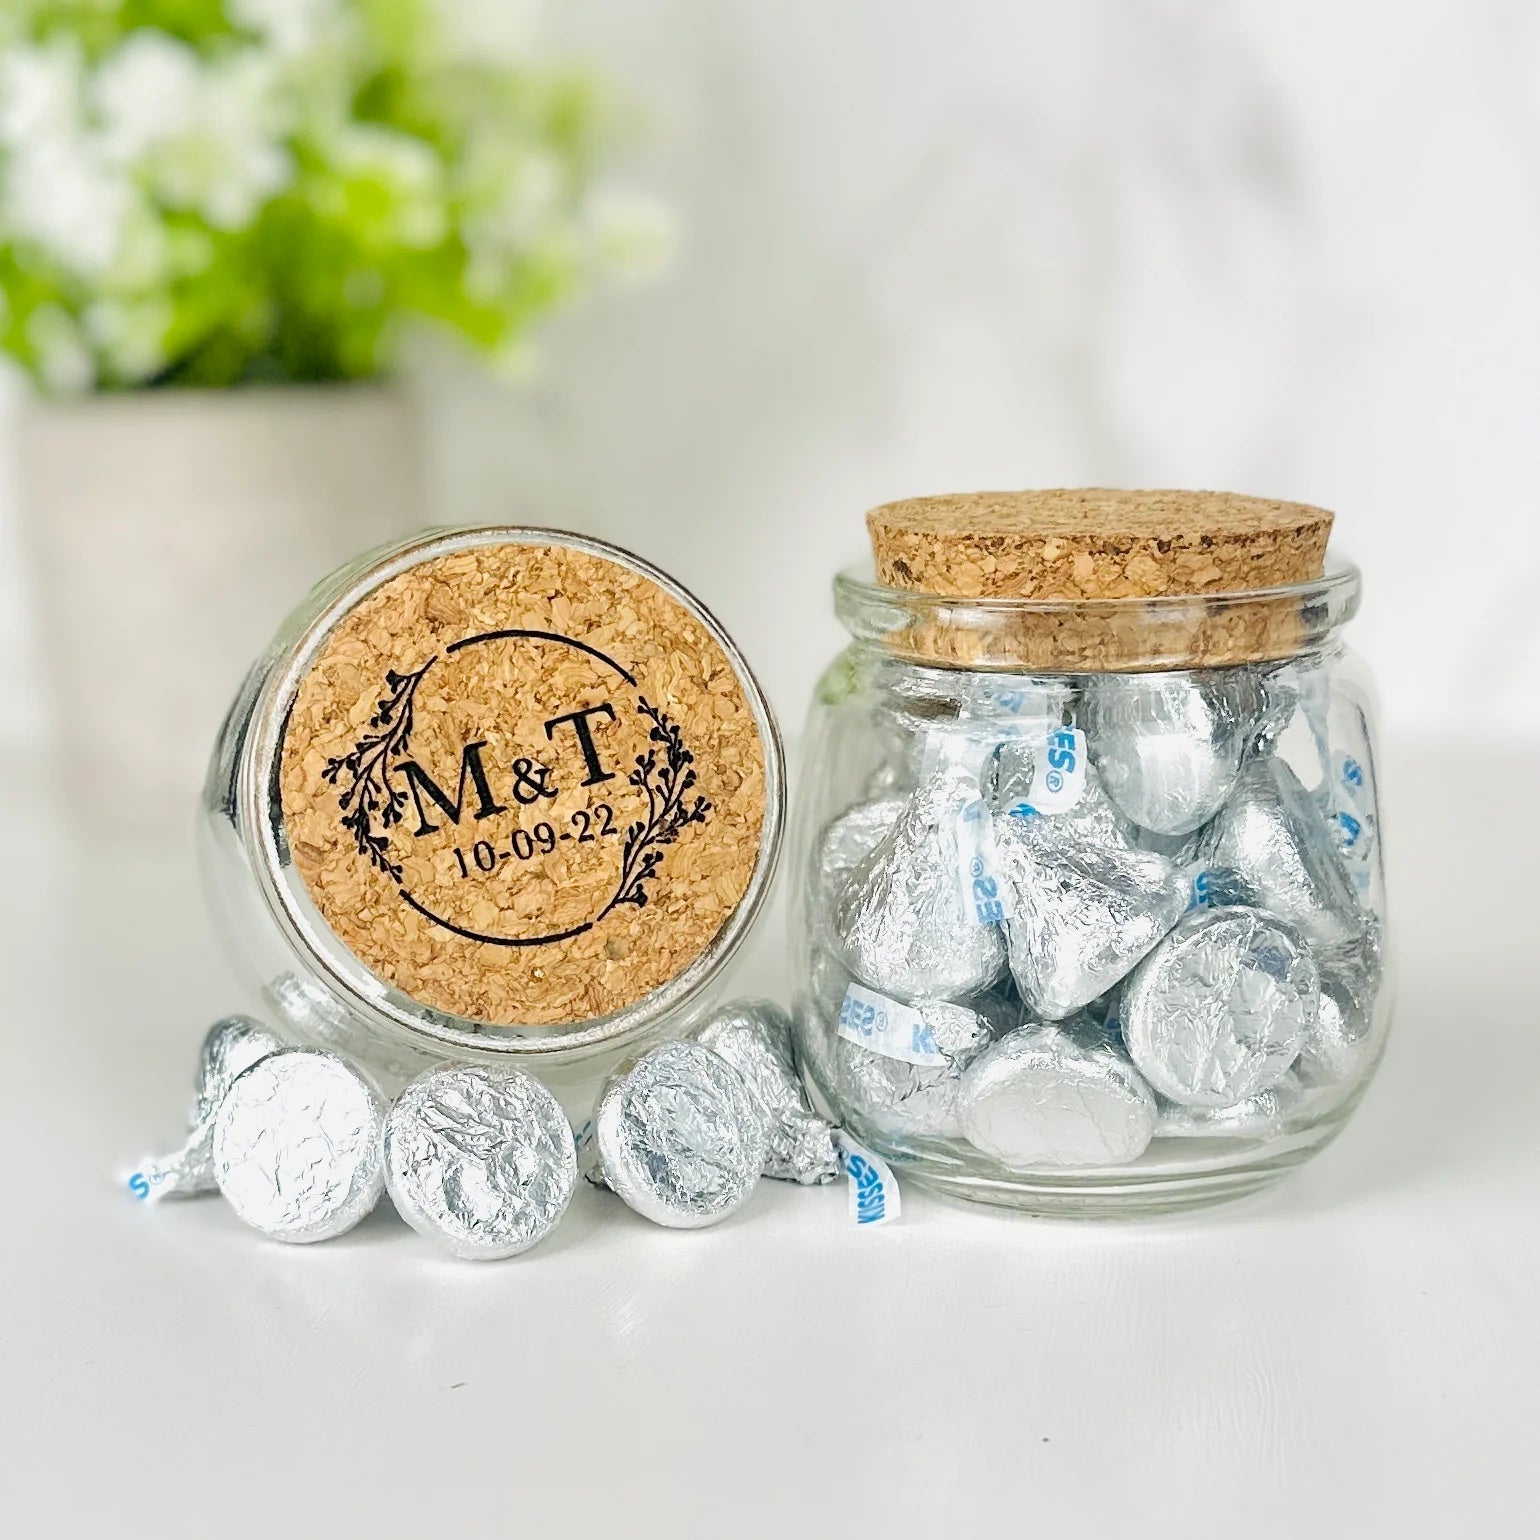 Indulge in Love with These 27 Decadent Chocolate Wedding Favors - Forever Wedding Favors